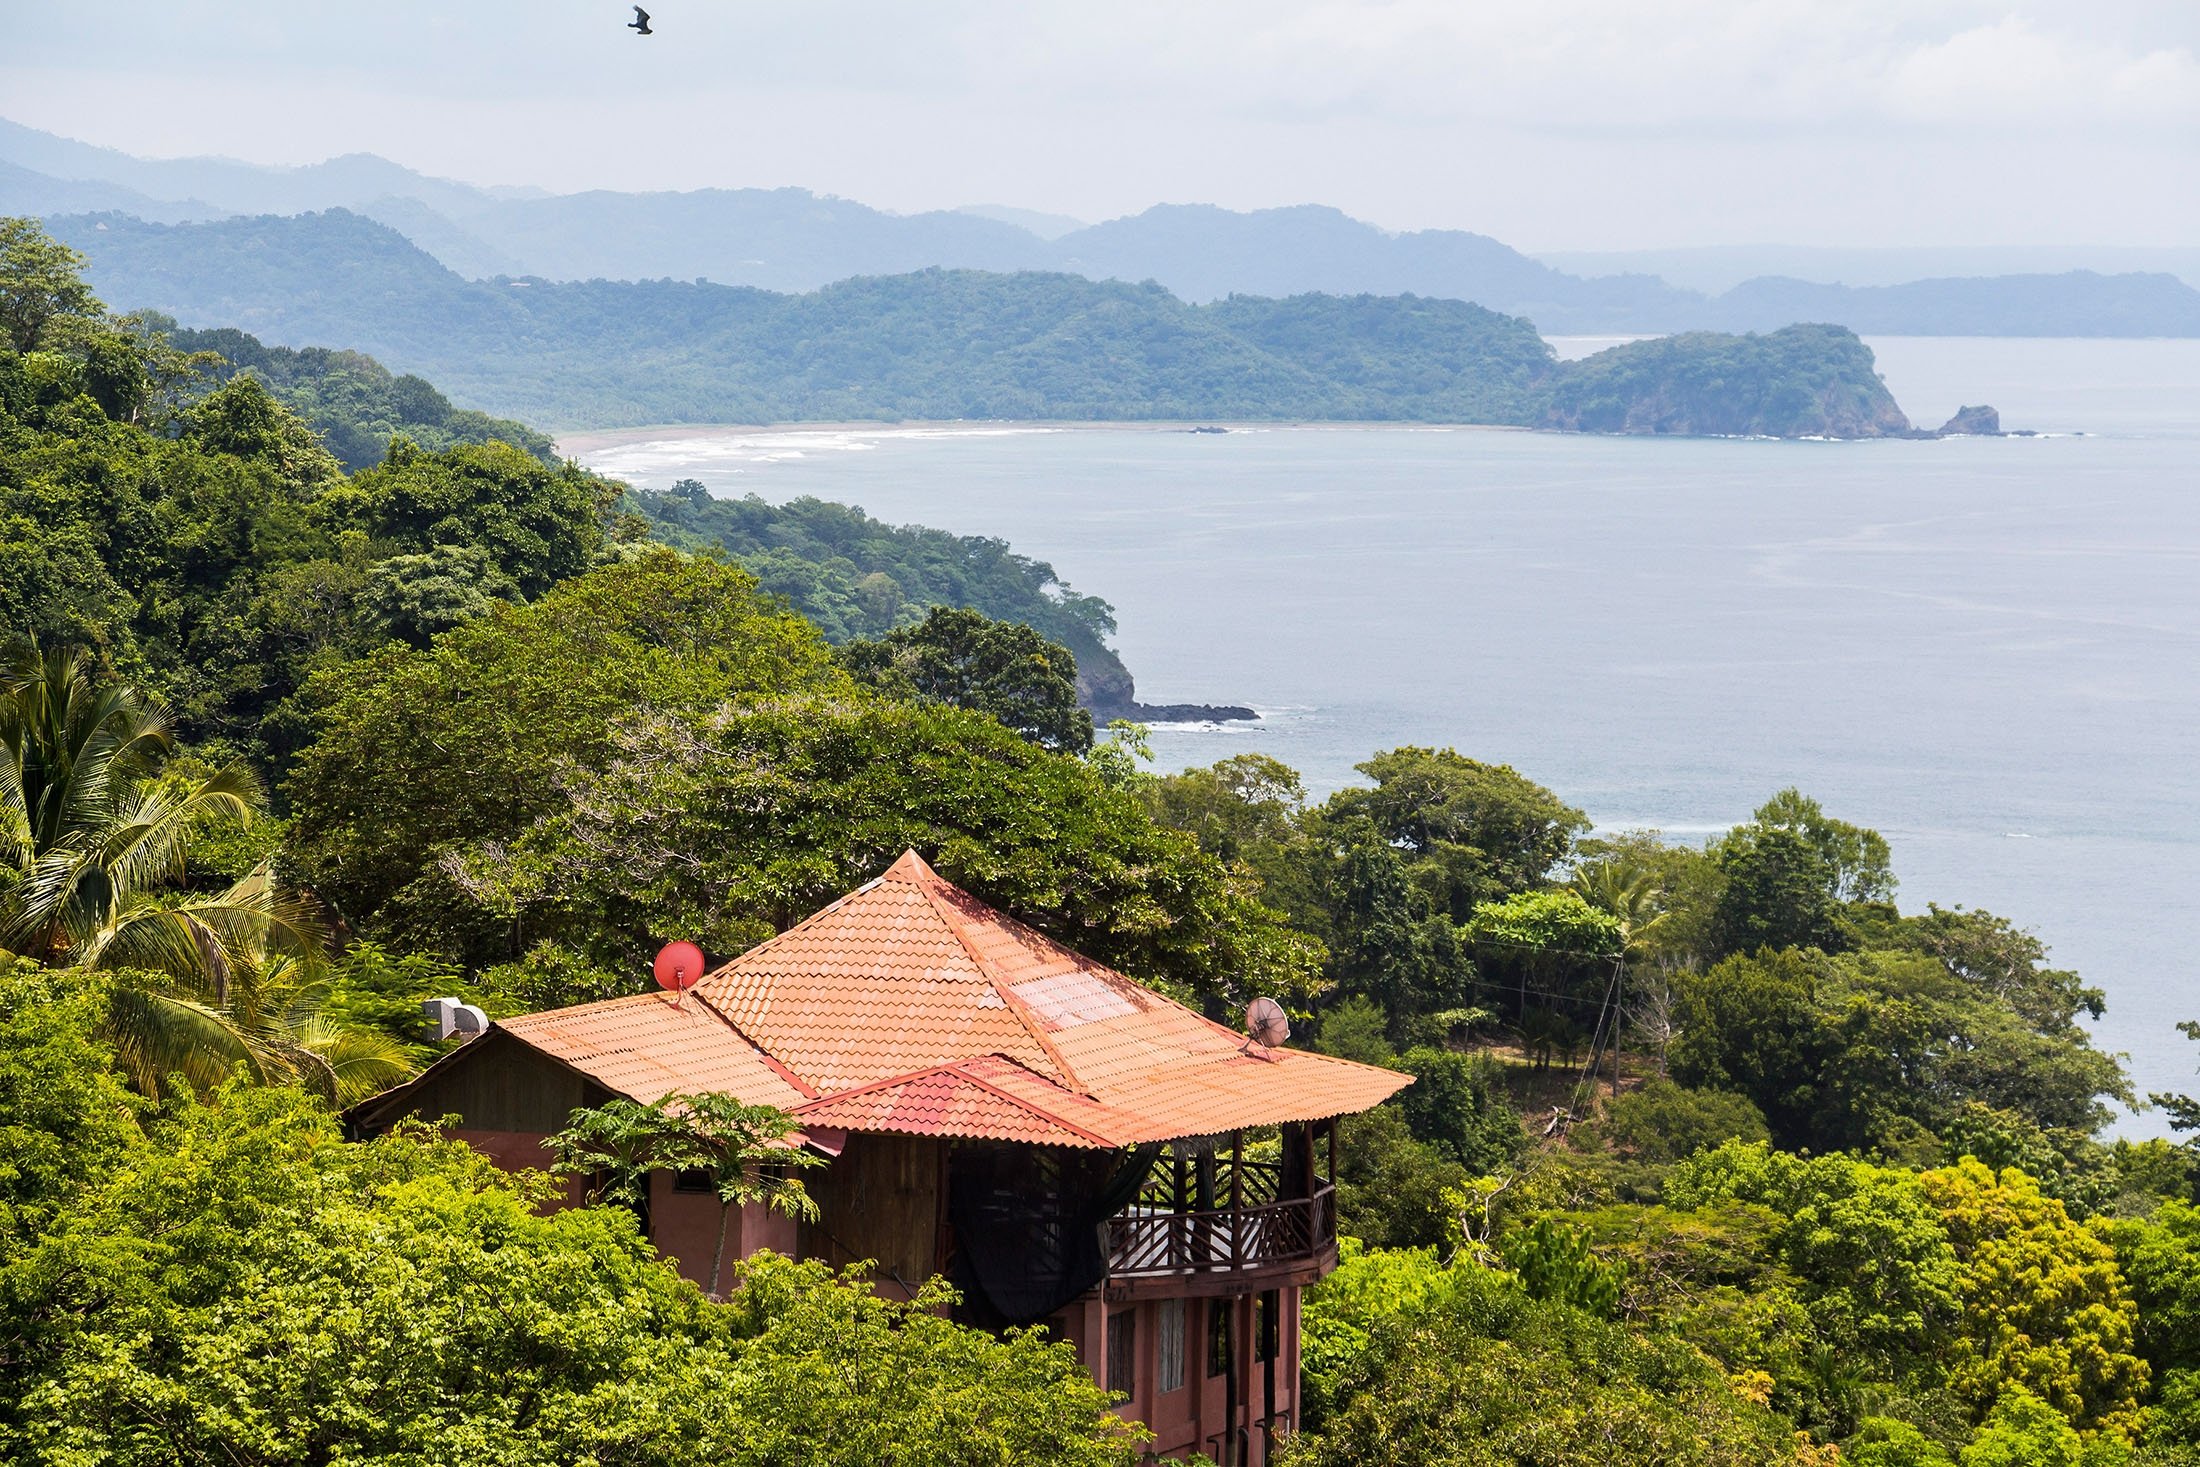 The forests and coastline of Nicoya, Costa Rica. (Shutterstock Photo)